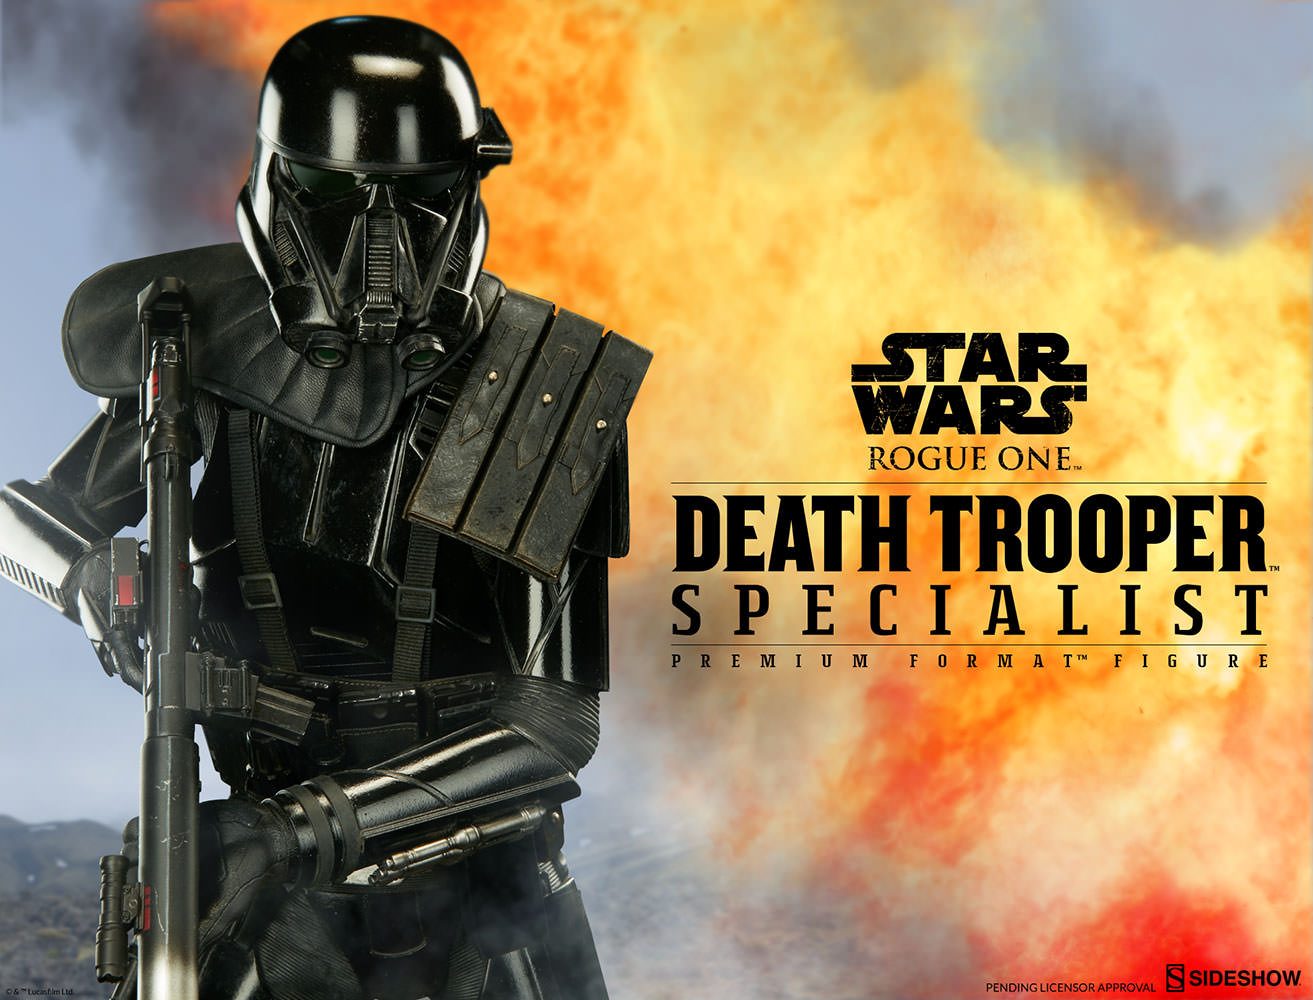 Rogue One, Hot Toys annuncia l'action figure del Death Trooper